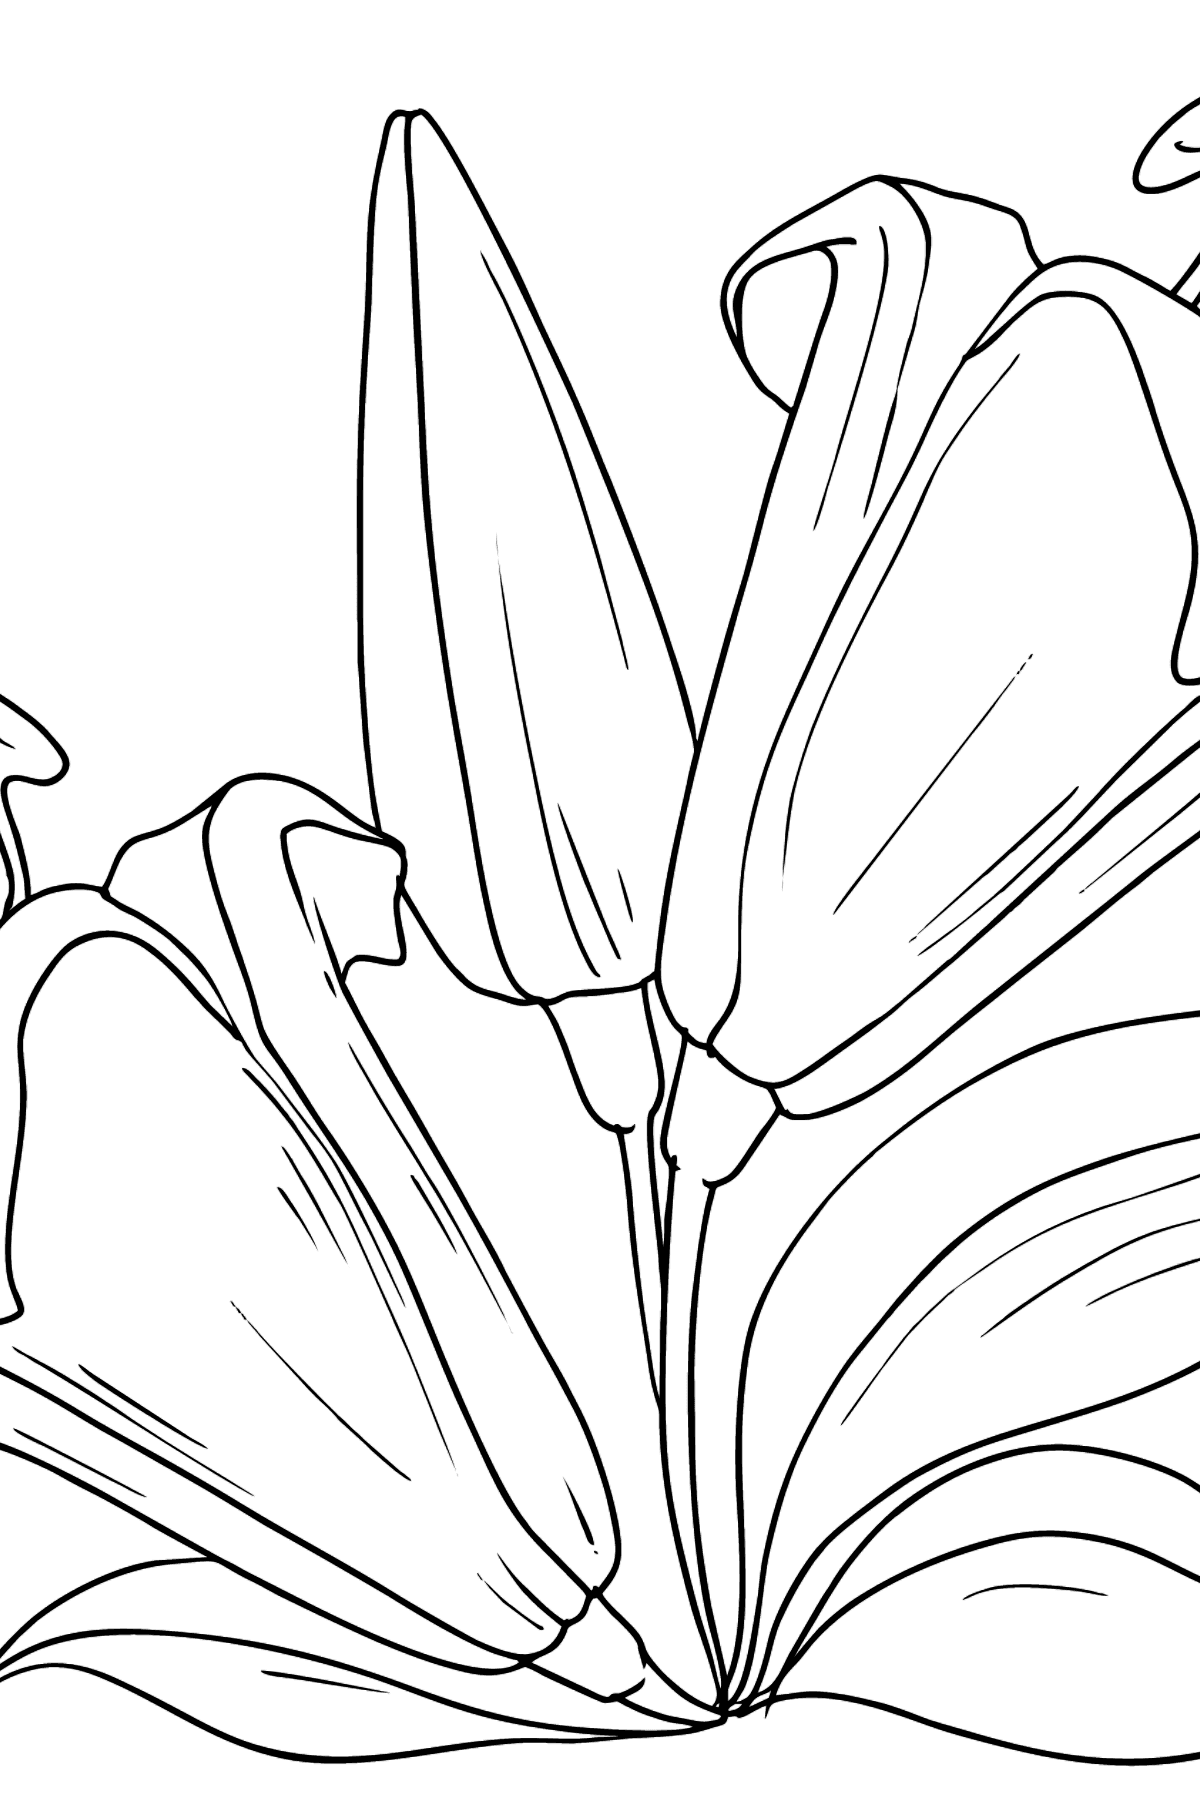 Flower Coloring Page - Lilies - Coloring Pages for Kids